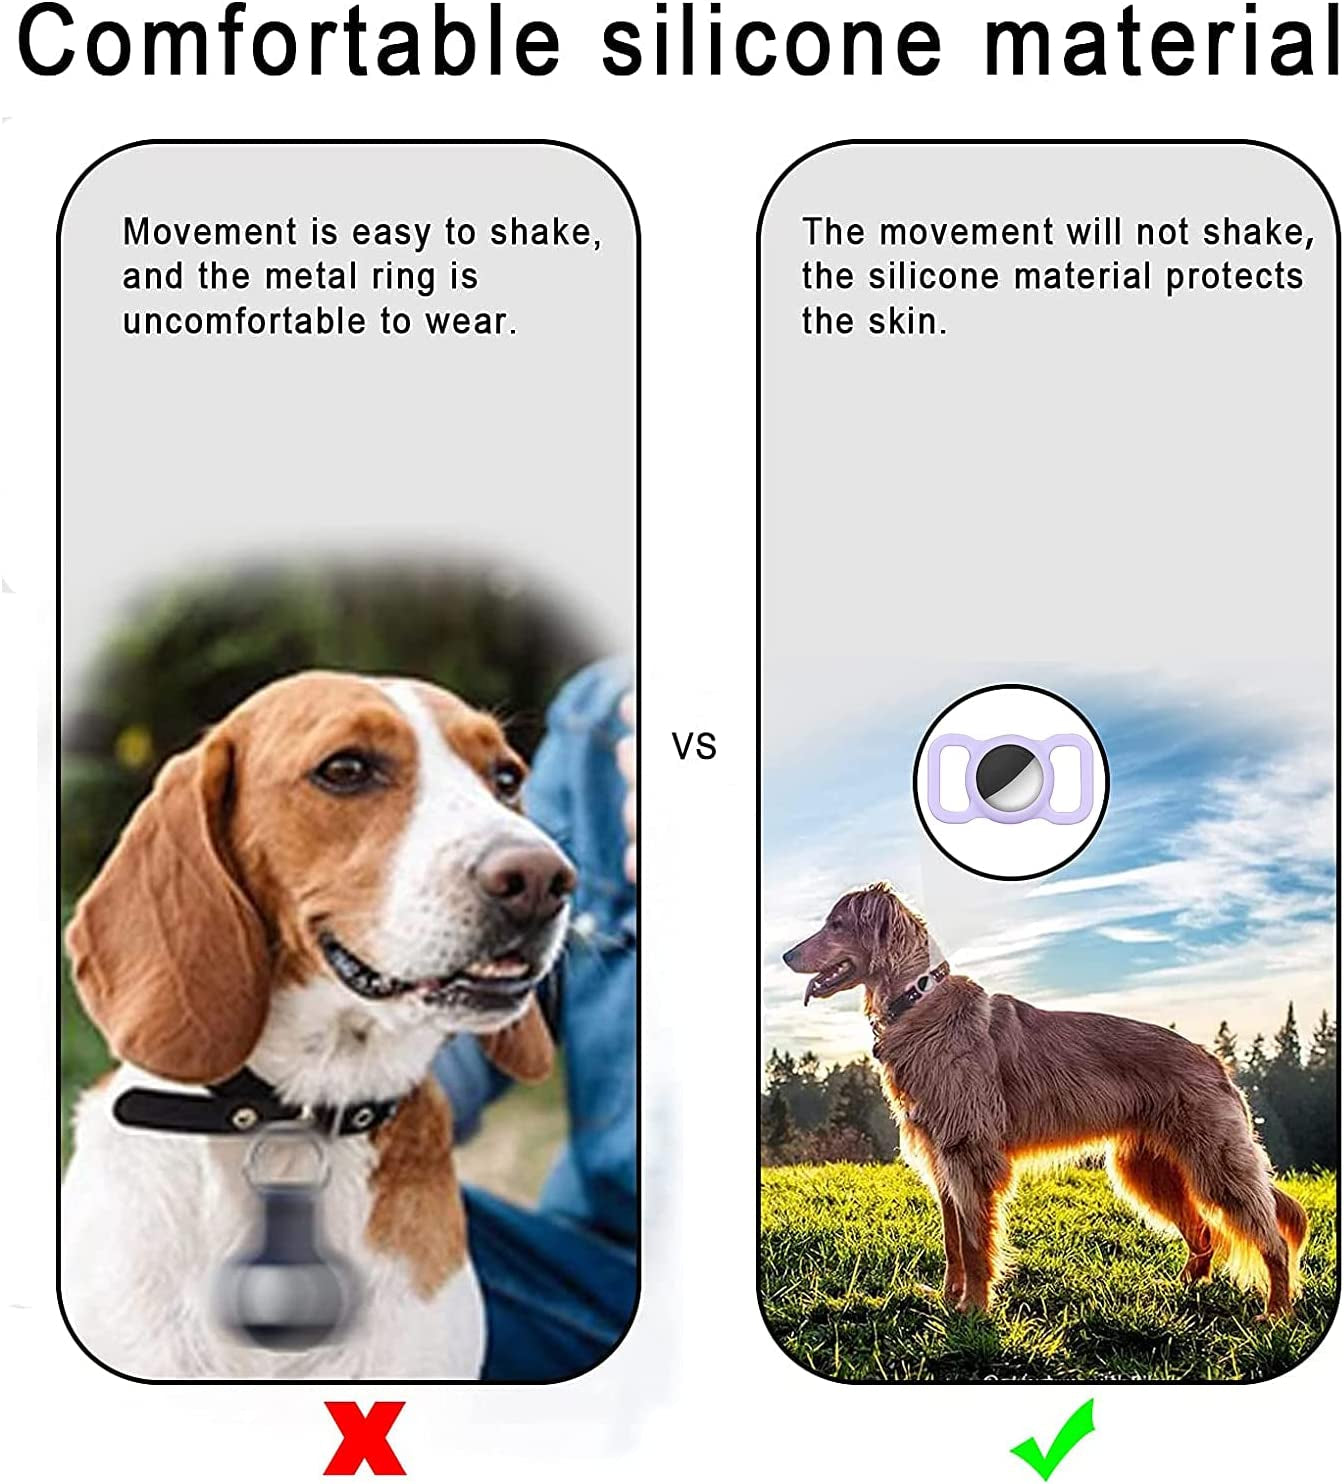 Dog Collar Holder Compatible with Airtag, Soft Silicone Waterproof Protective Case Cover for Apple Air Tags Tracker